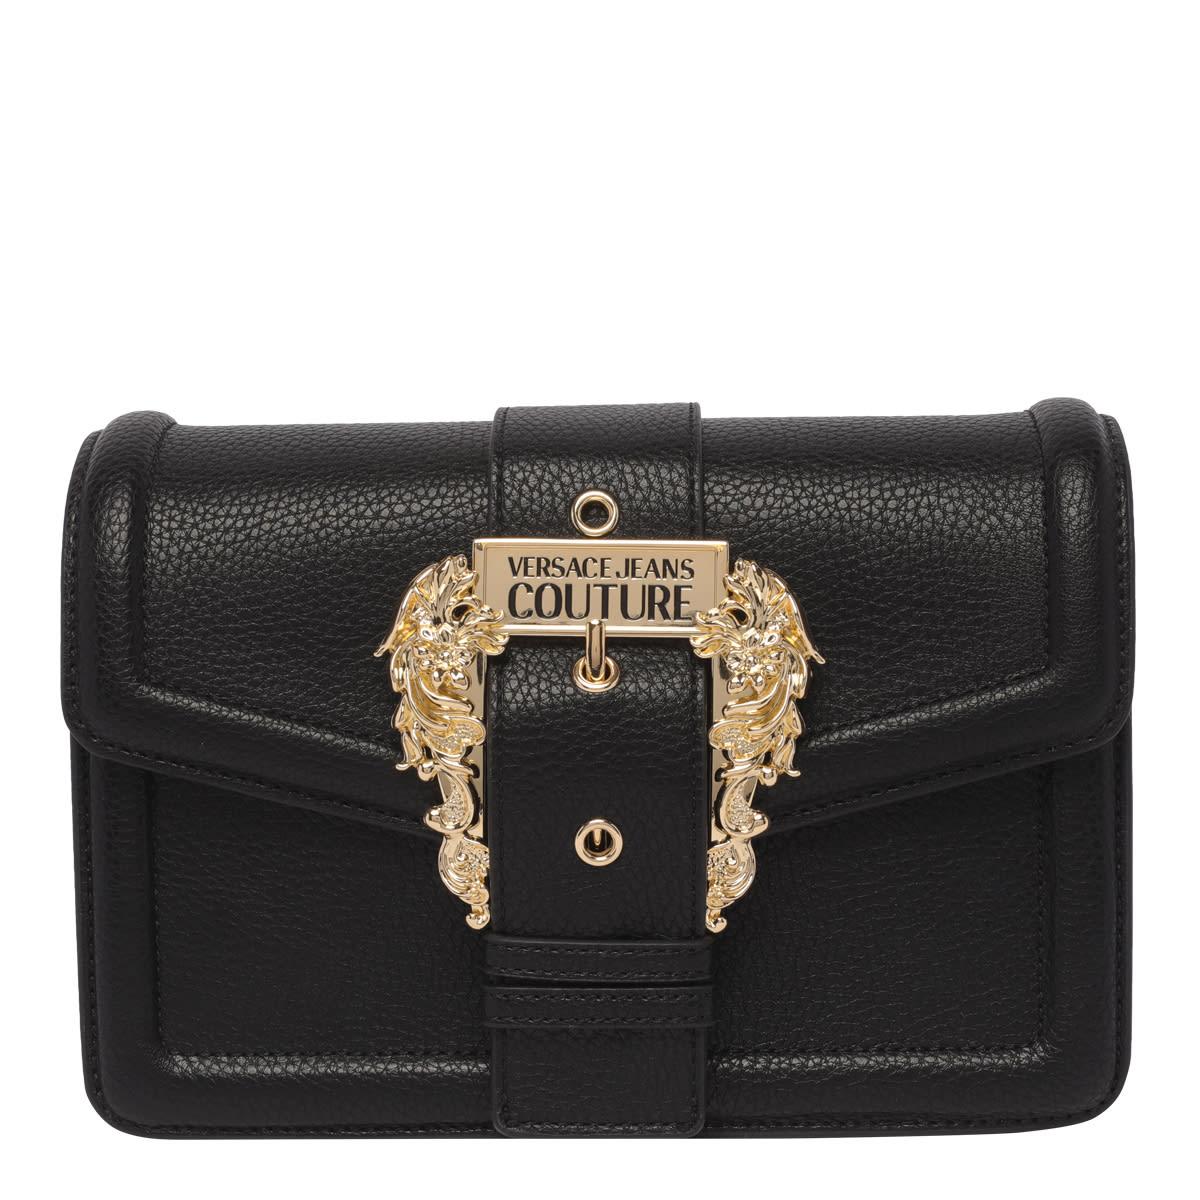 Versace Jeans Couture Logo Couture Crossbody Bag in Black | Lyst